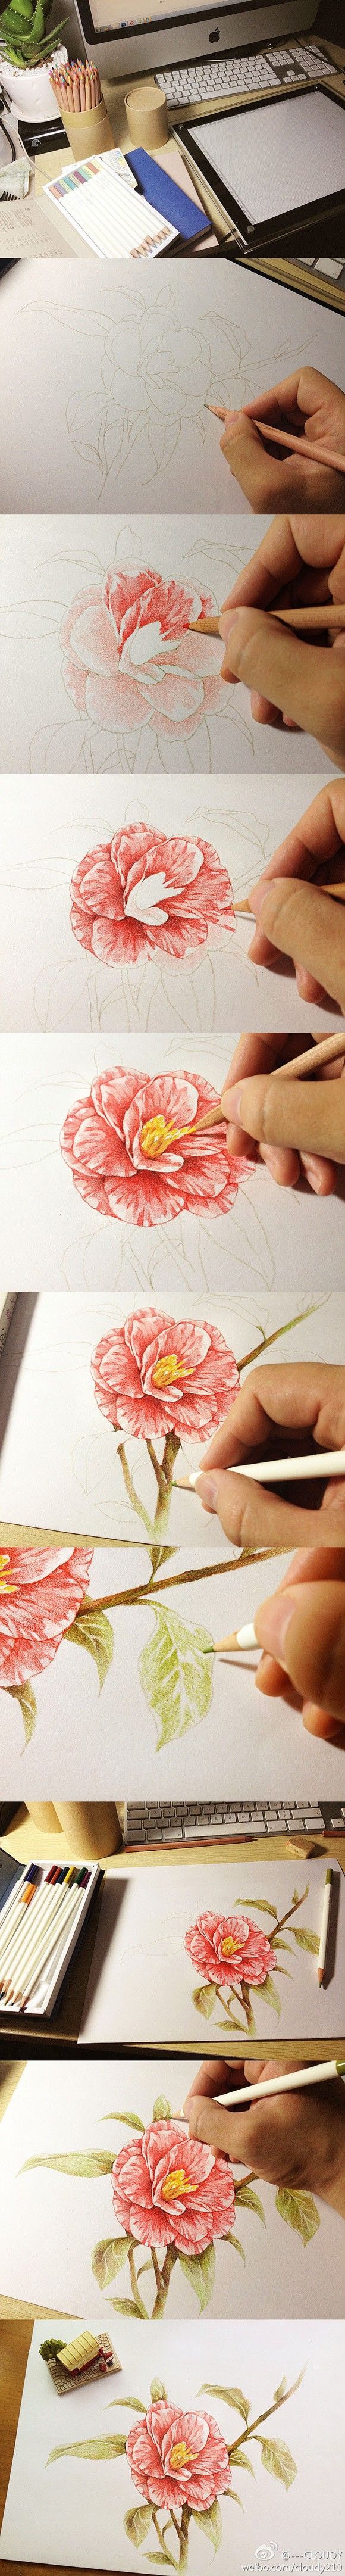 Steps to colour a flower